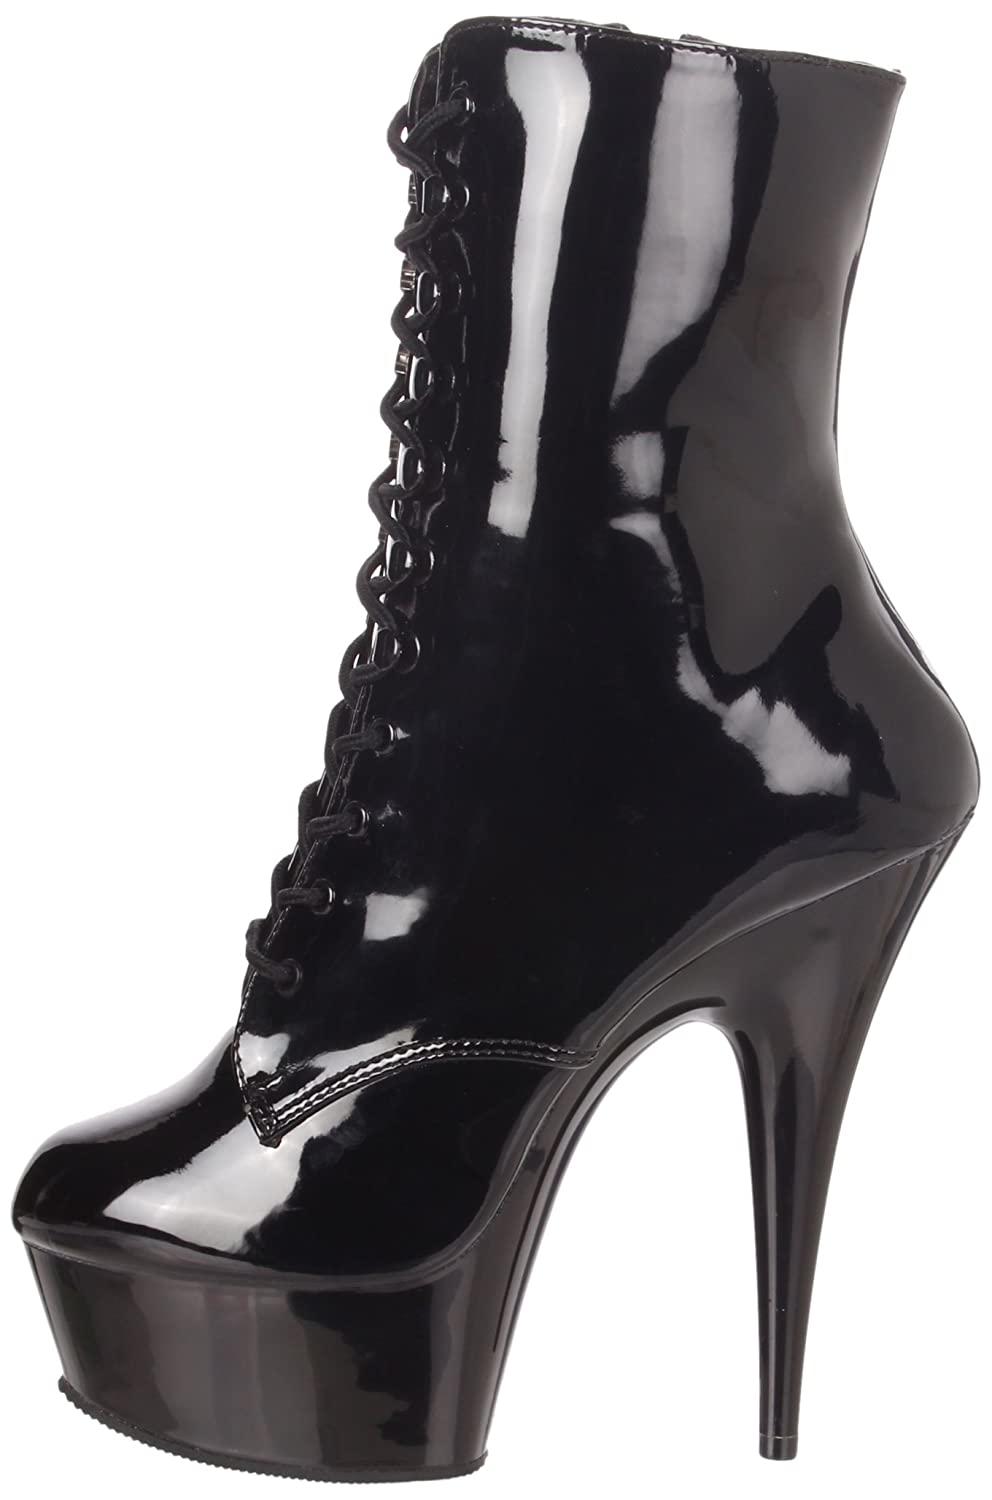 Black Patent Leather Lace Up Ankle Boot